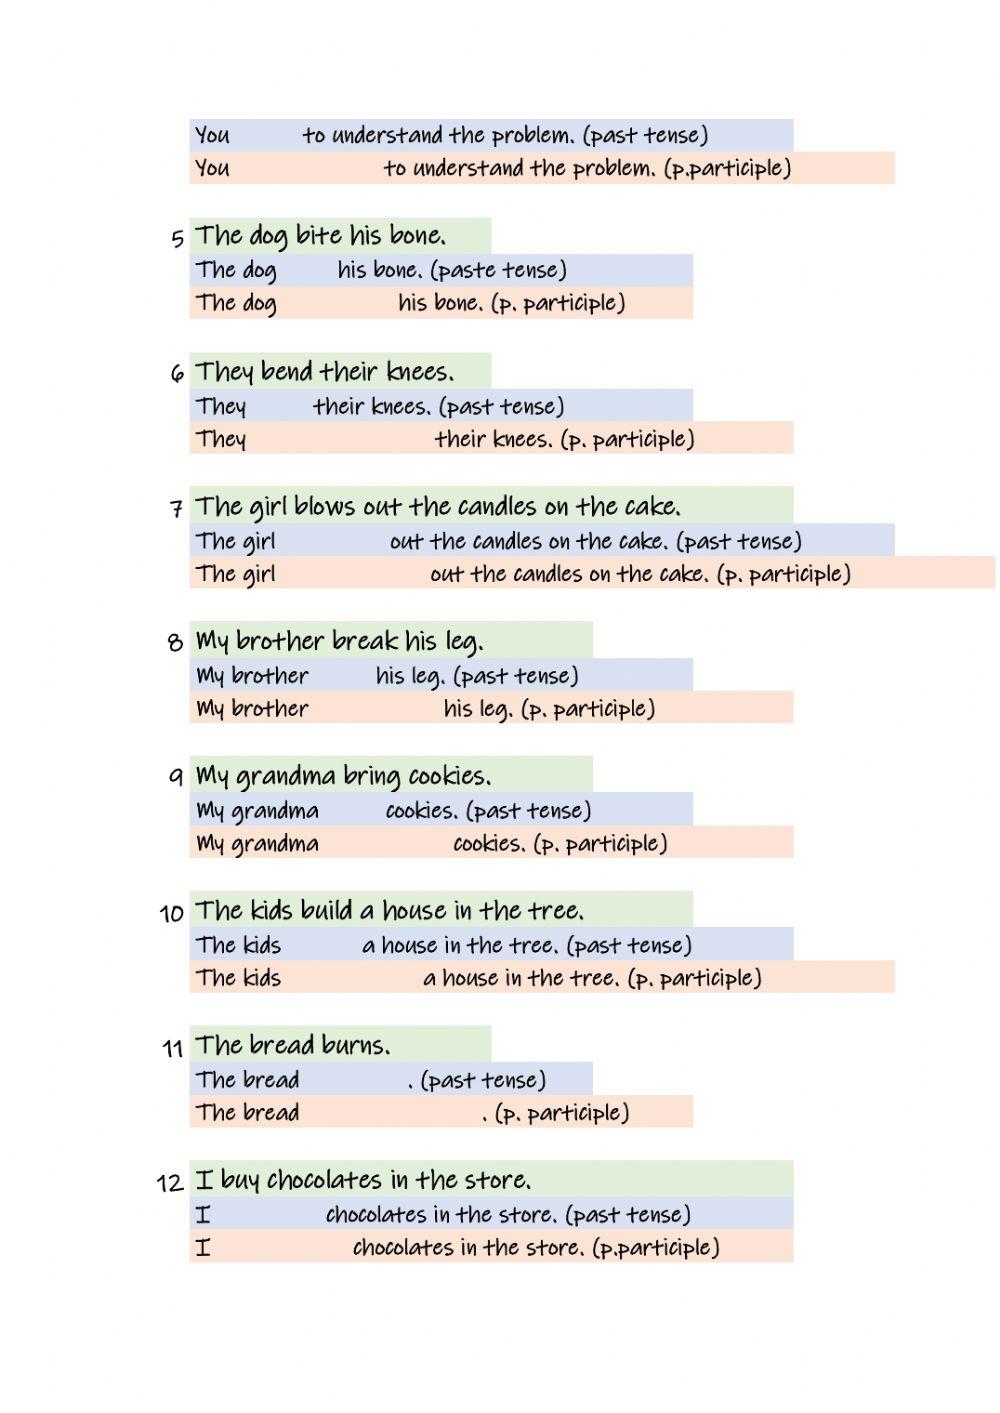 Verb tenses with examples